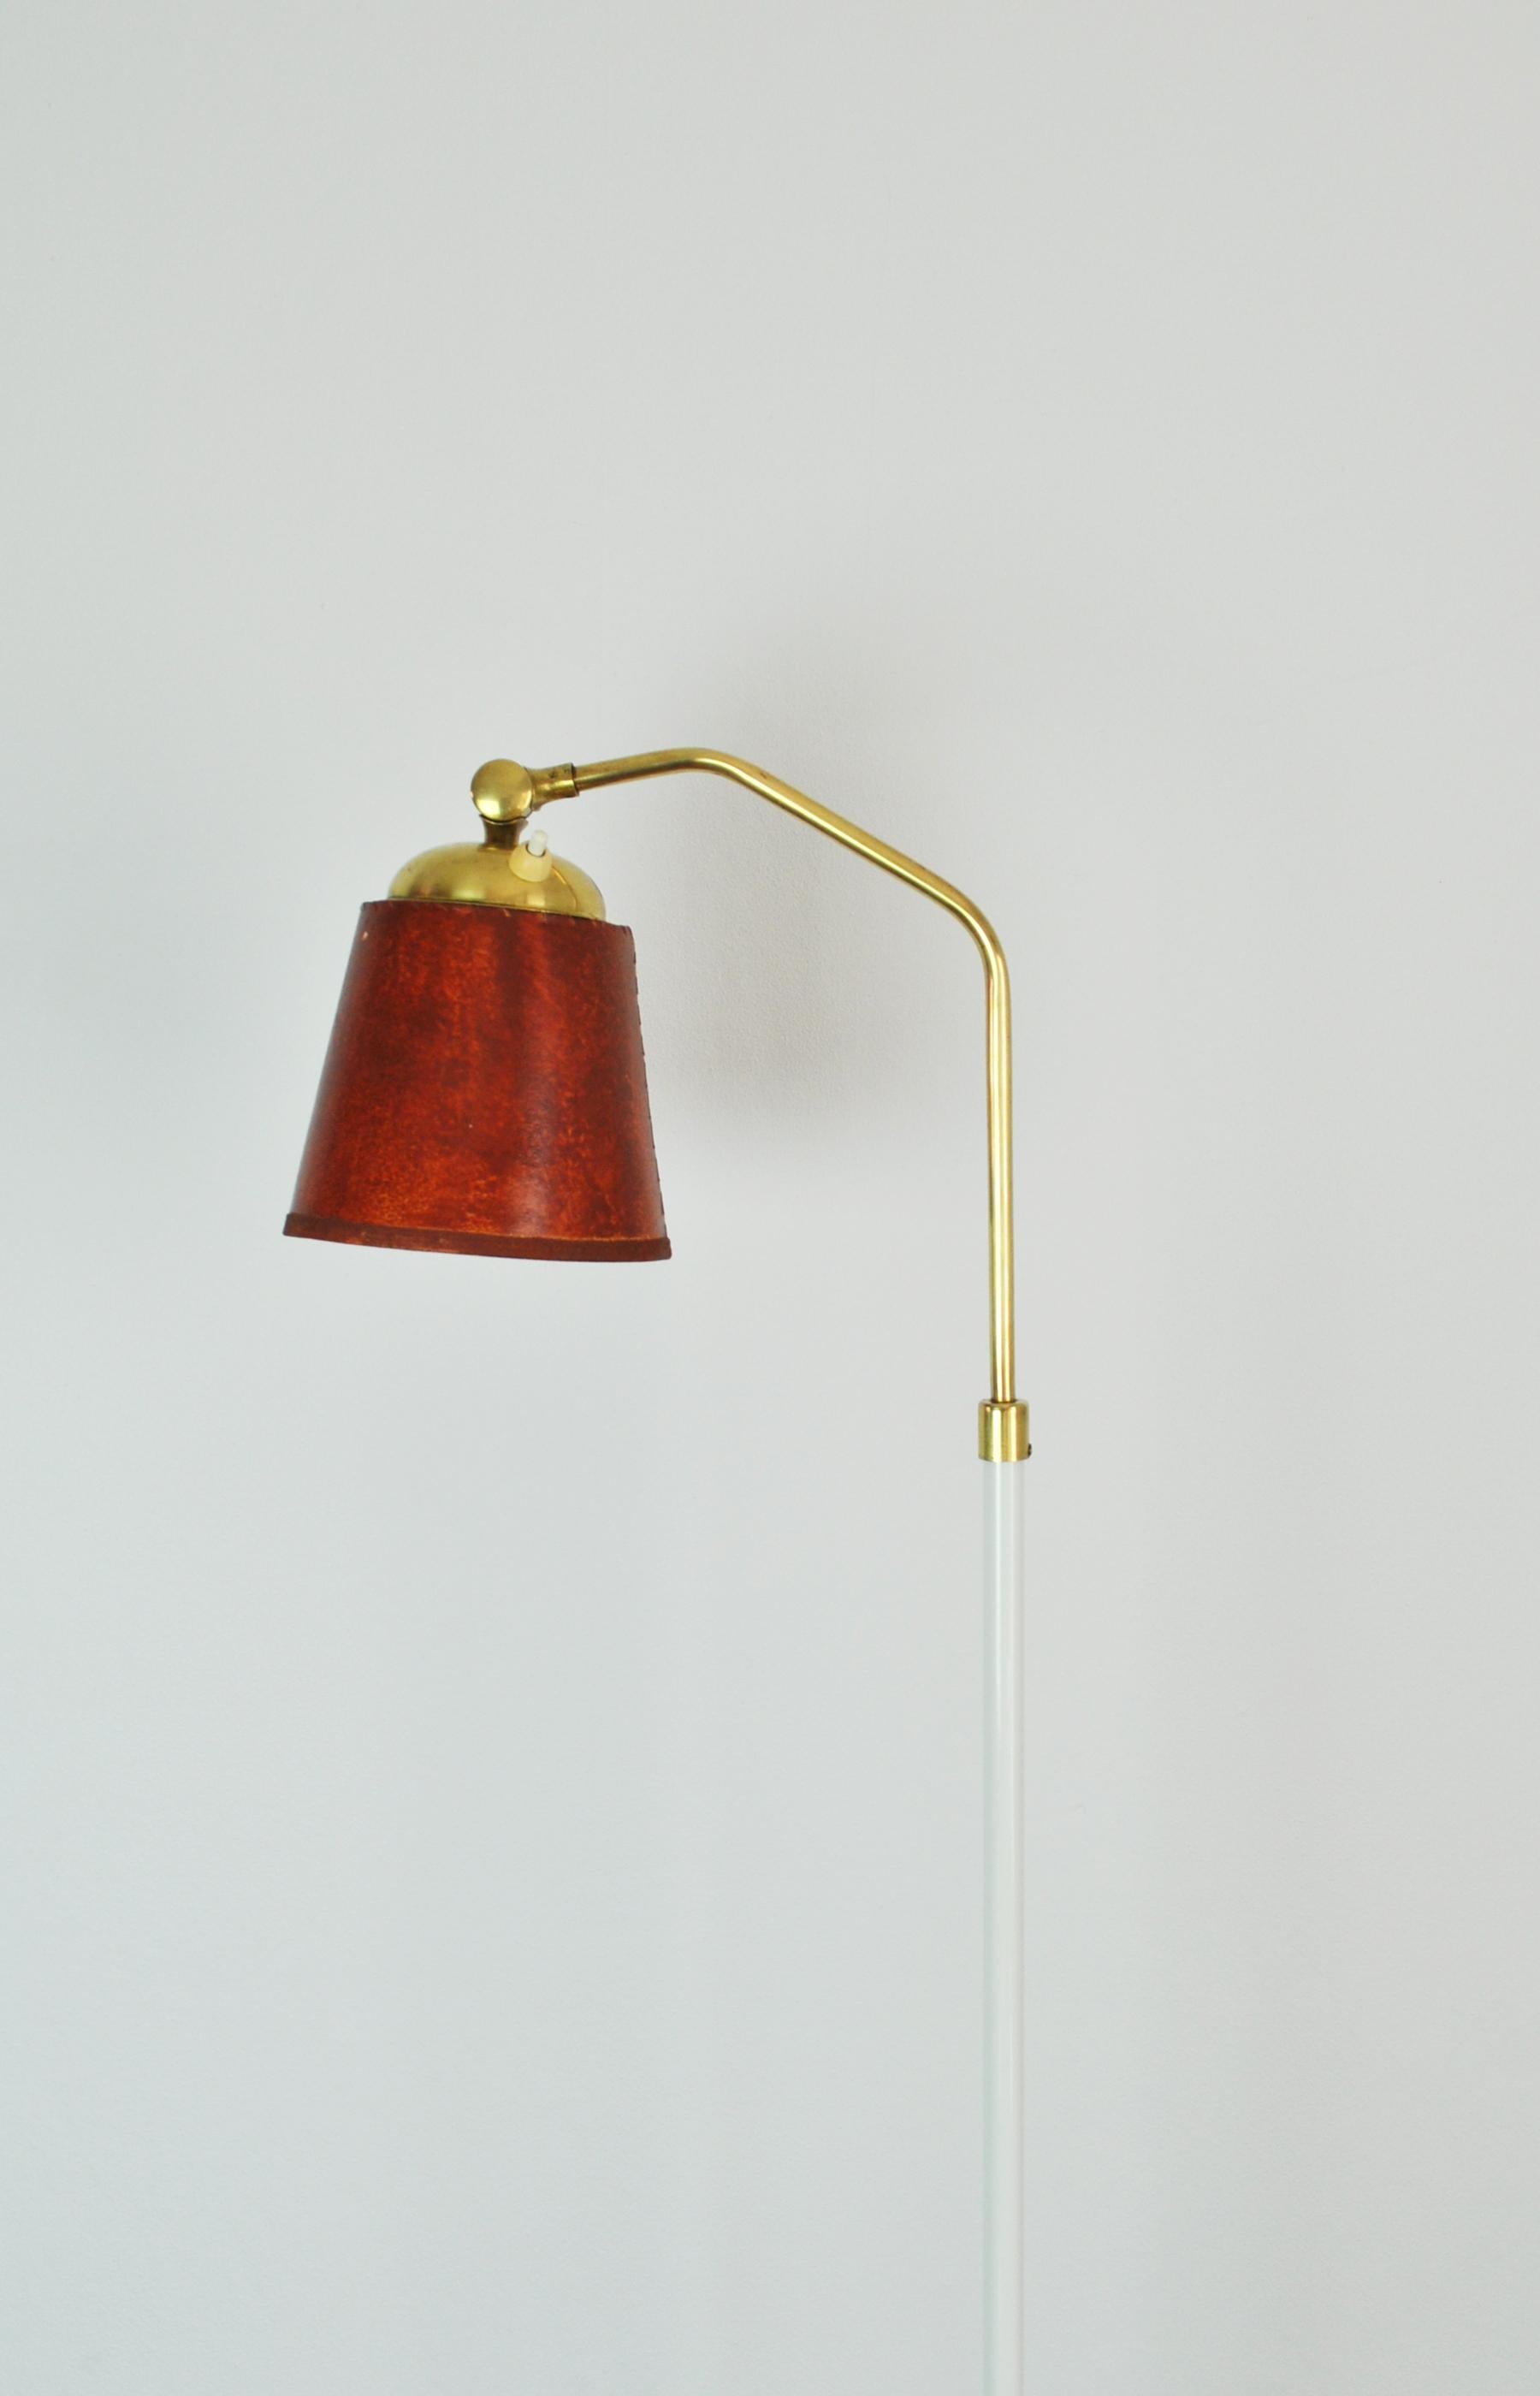 Swedish floor lamp attributed Josef Frank, 1950s
Polished brass and new lacquered metal, rewired.
Comes with original lamp shade.

E27 light socket. Height 138 cm, diameter of shade 10/14 cm, height of shade 13 cm.